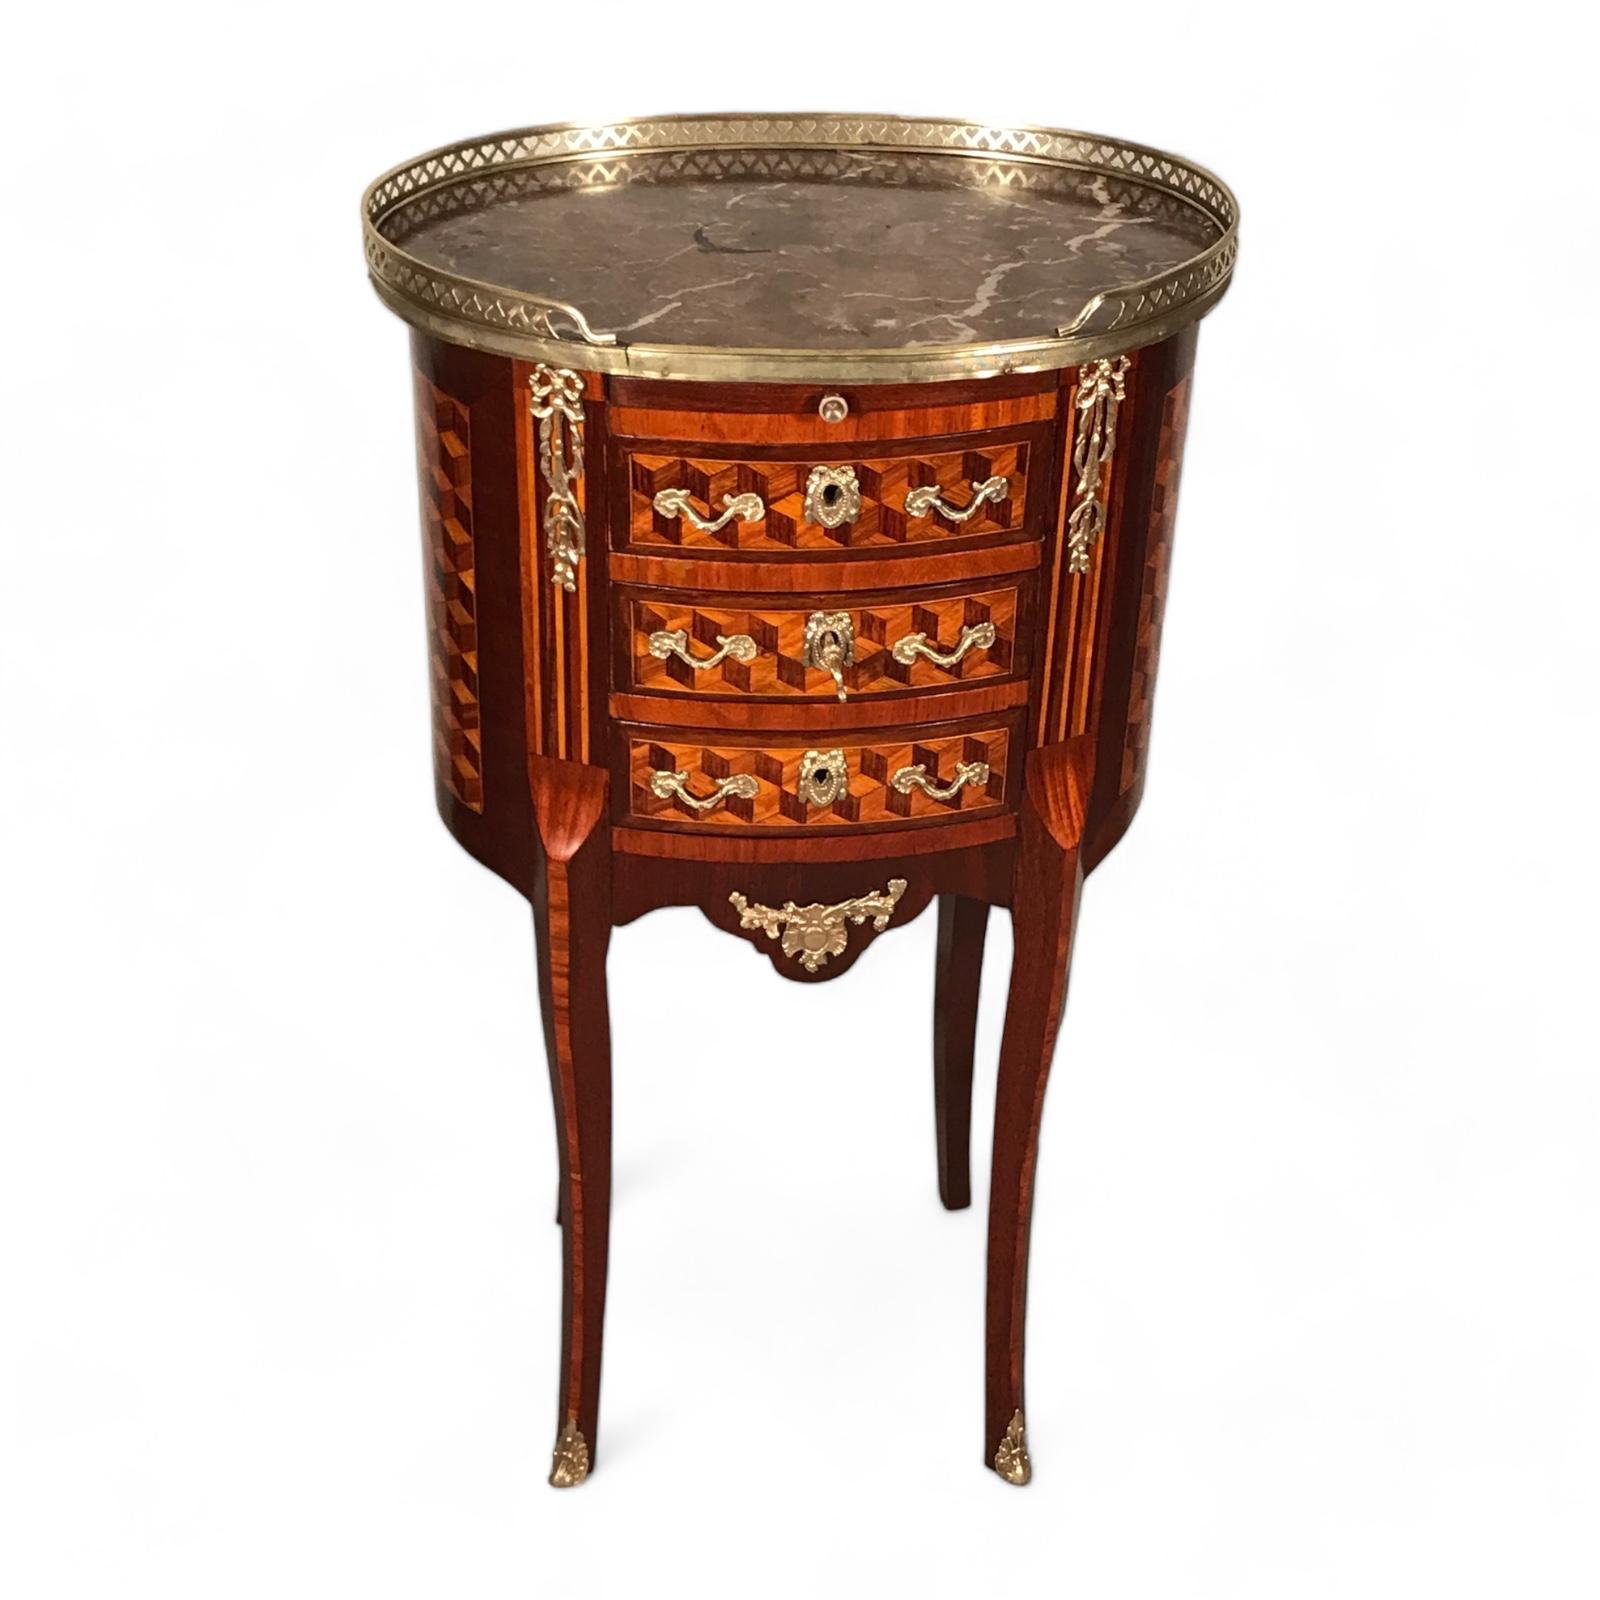 Introducing a distinguished piece of furniture, the Louis XVI Style Tambour Side Table, renowned for its exquisite block marquetry. This timeless side table features three drawers and a pullout board, offering both functionality and elegance, while